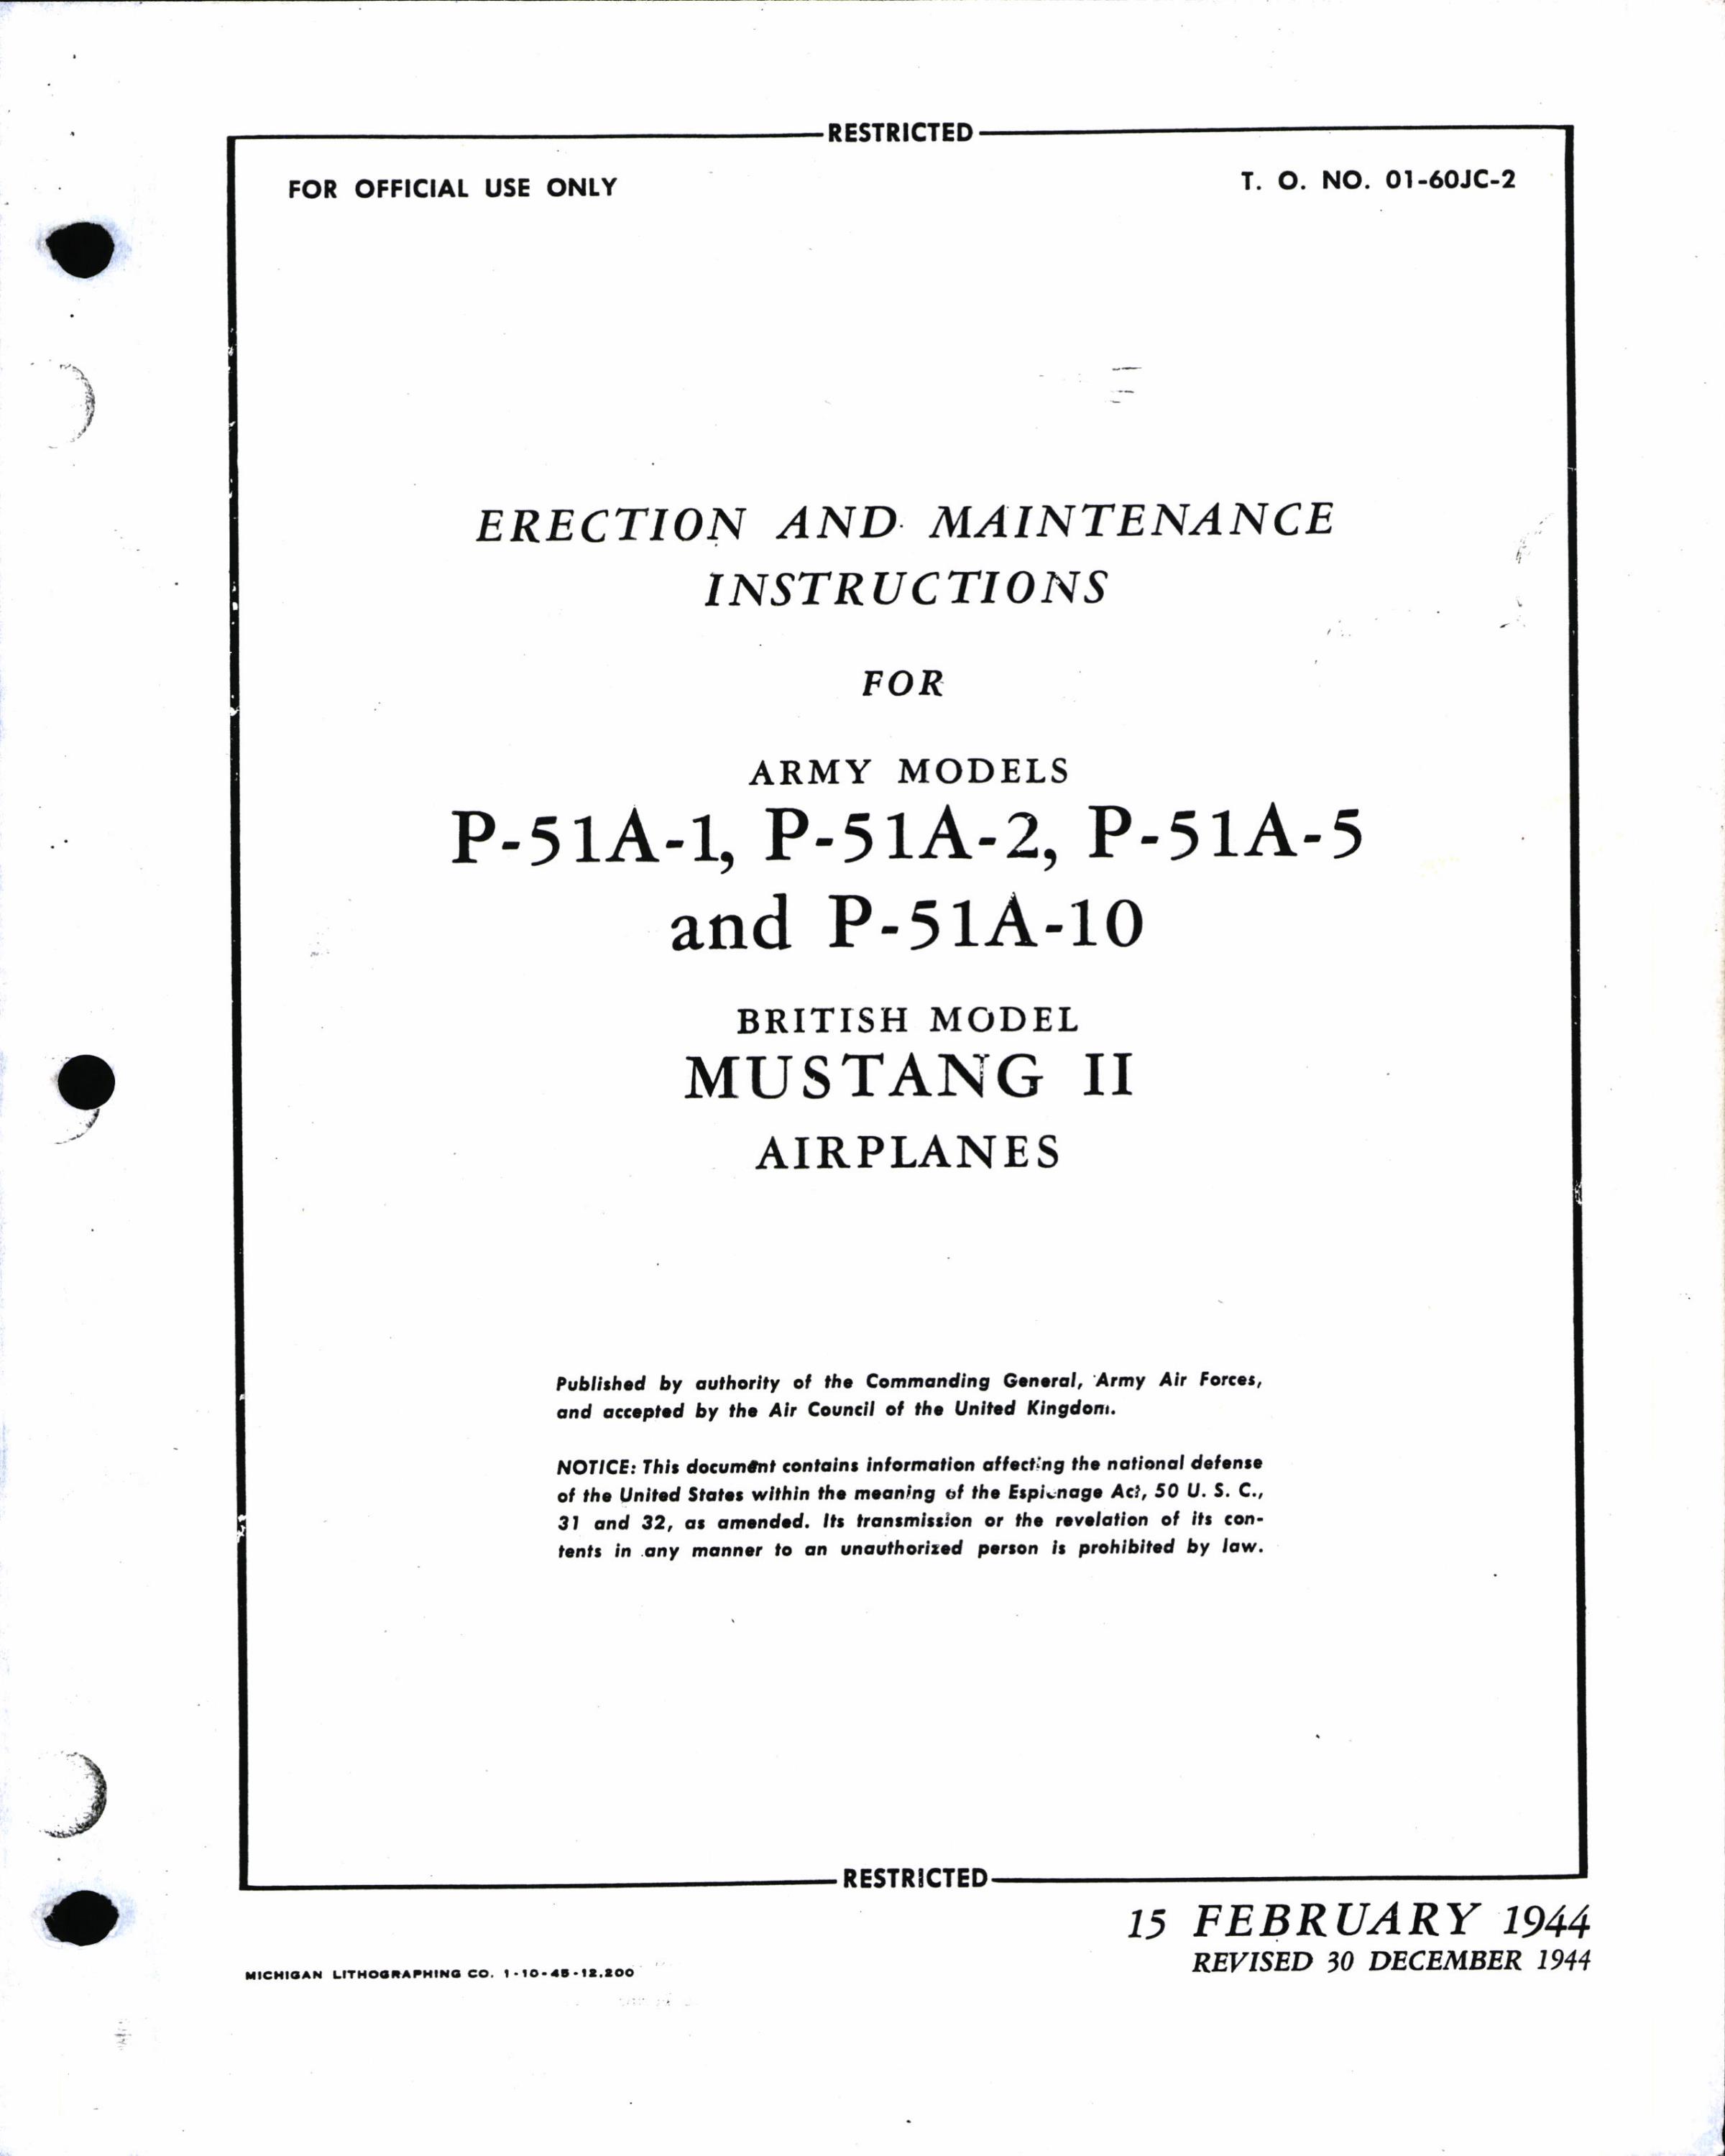 Sample page 1 from AirCorps Library document: Erection and Maintenance Instructions for P-51A Series